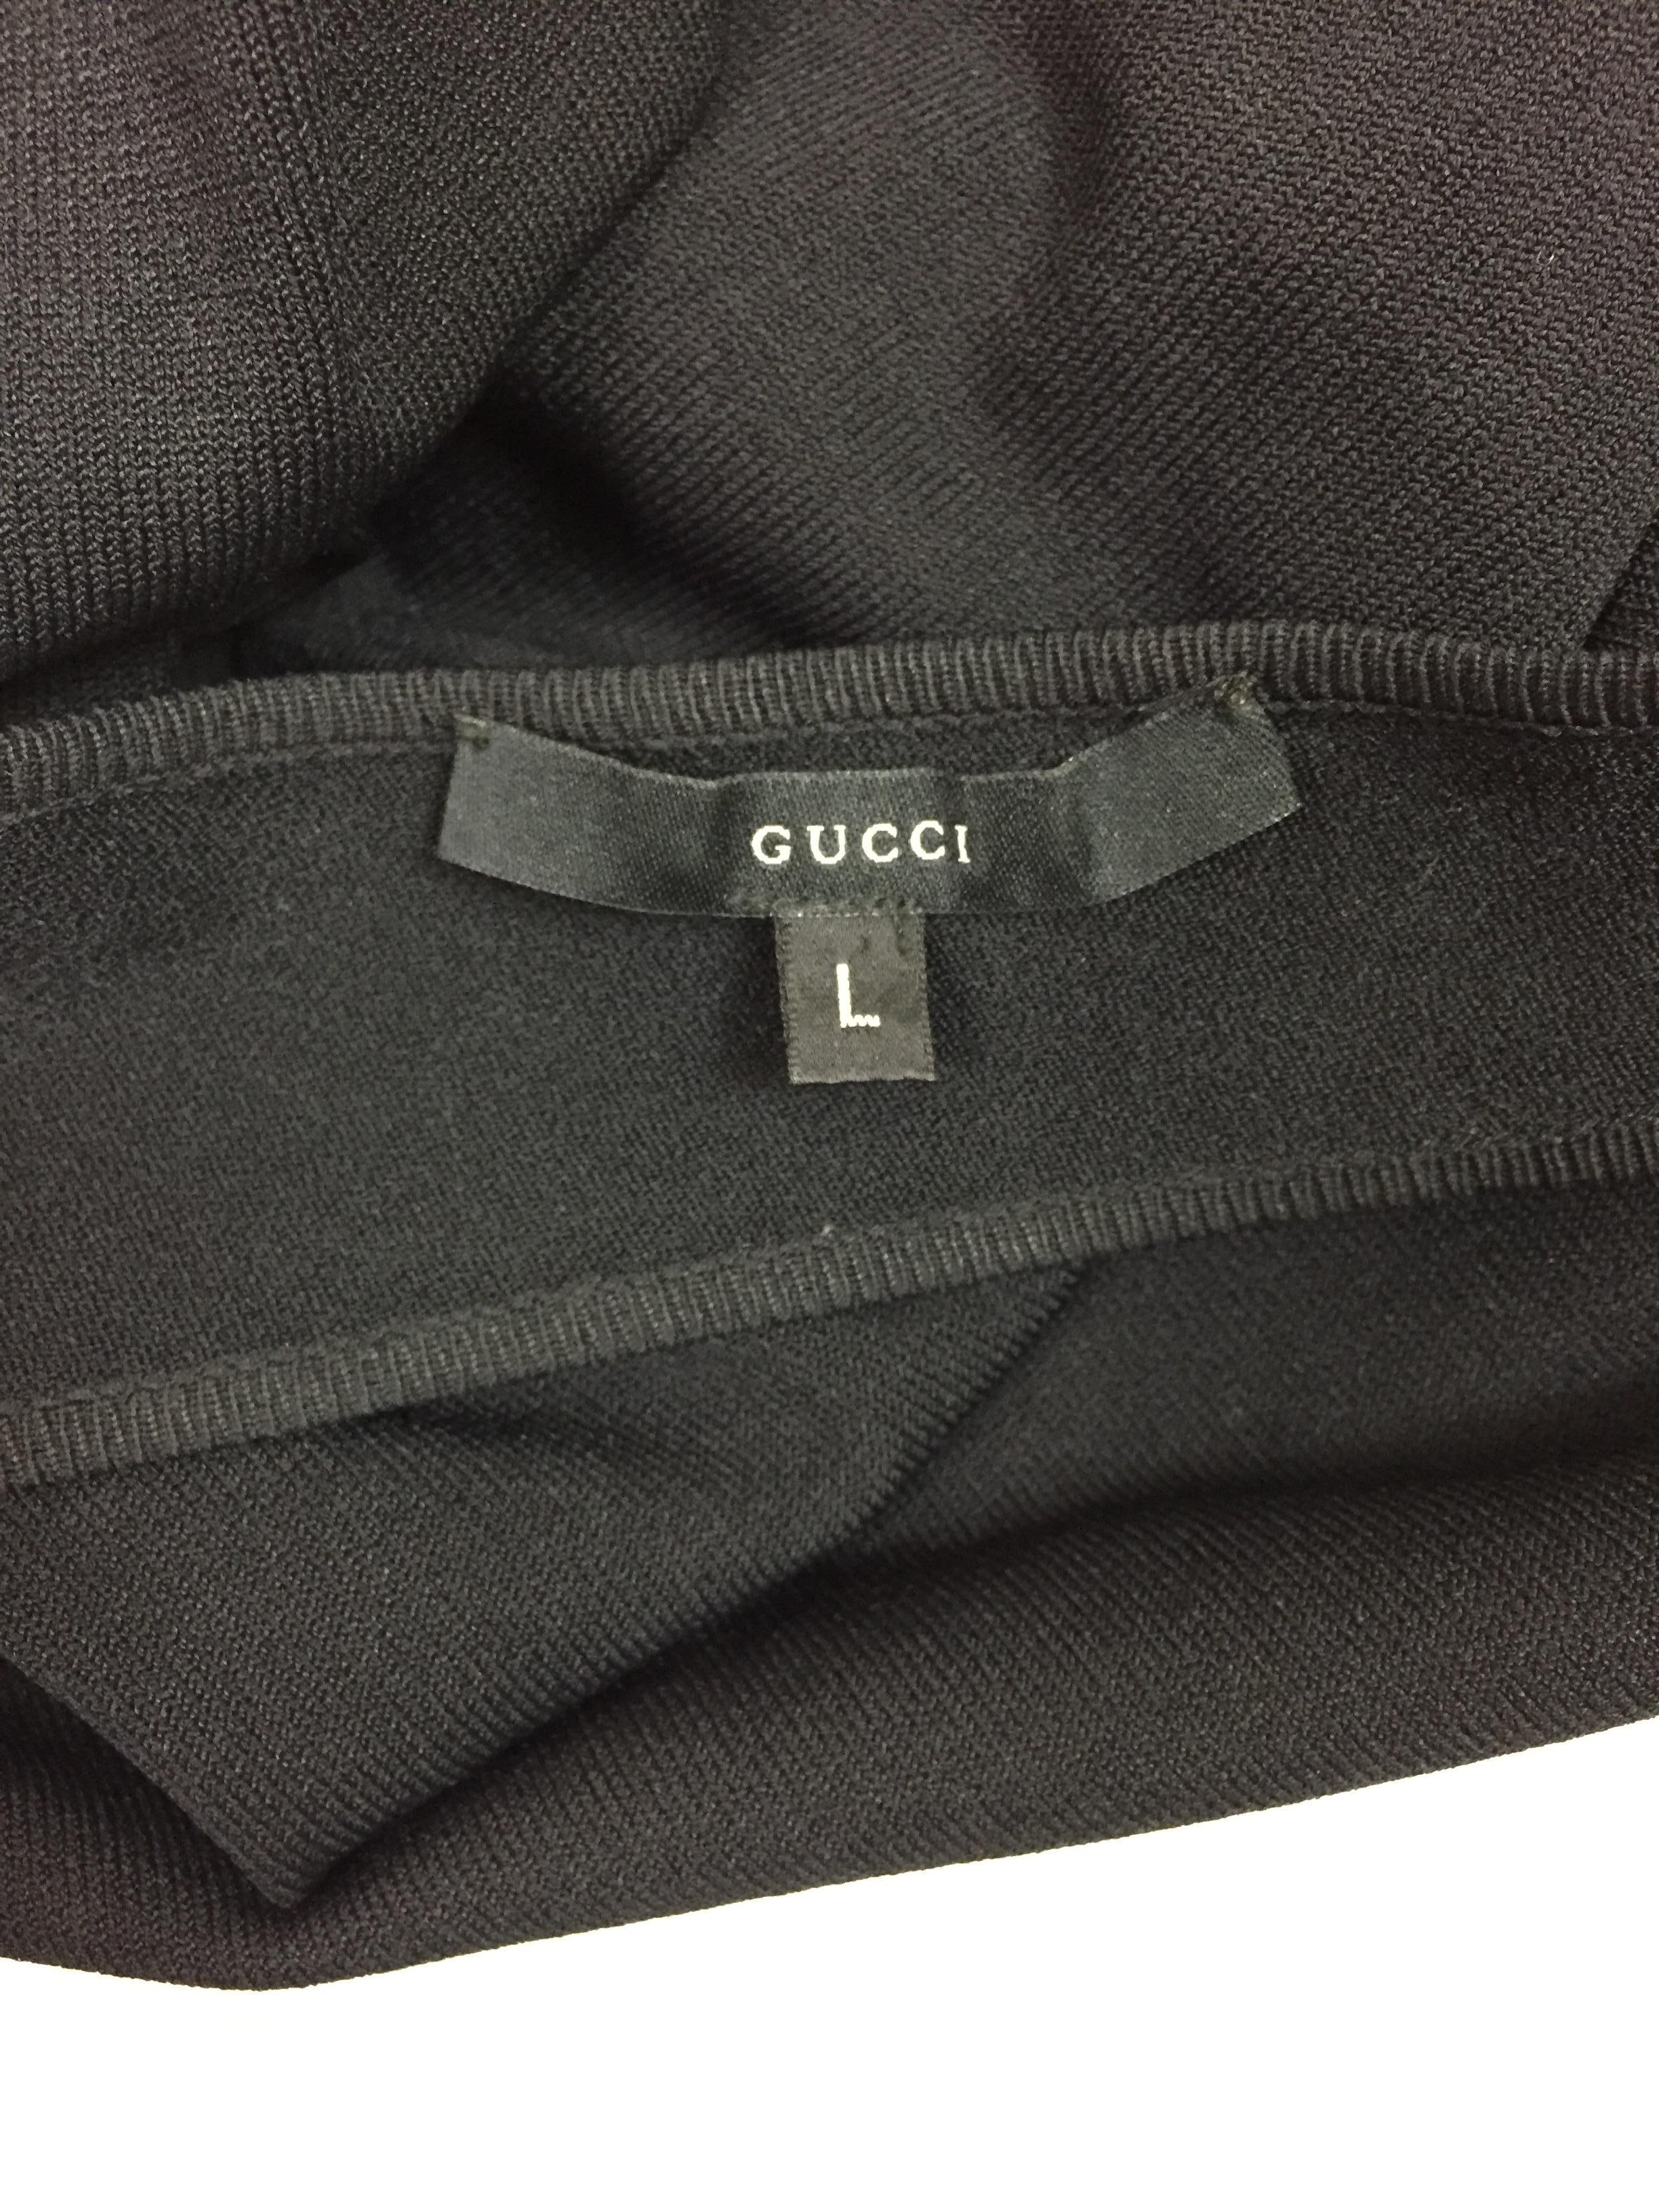 S/S 2000 Gucci Tom Ford One Shoulder Black Knit Plunging Back Bodycon Dress In Good Condition In Yukon, OK